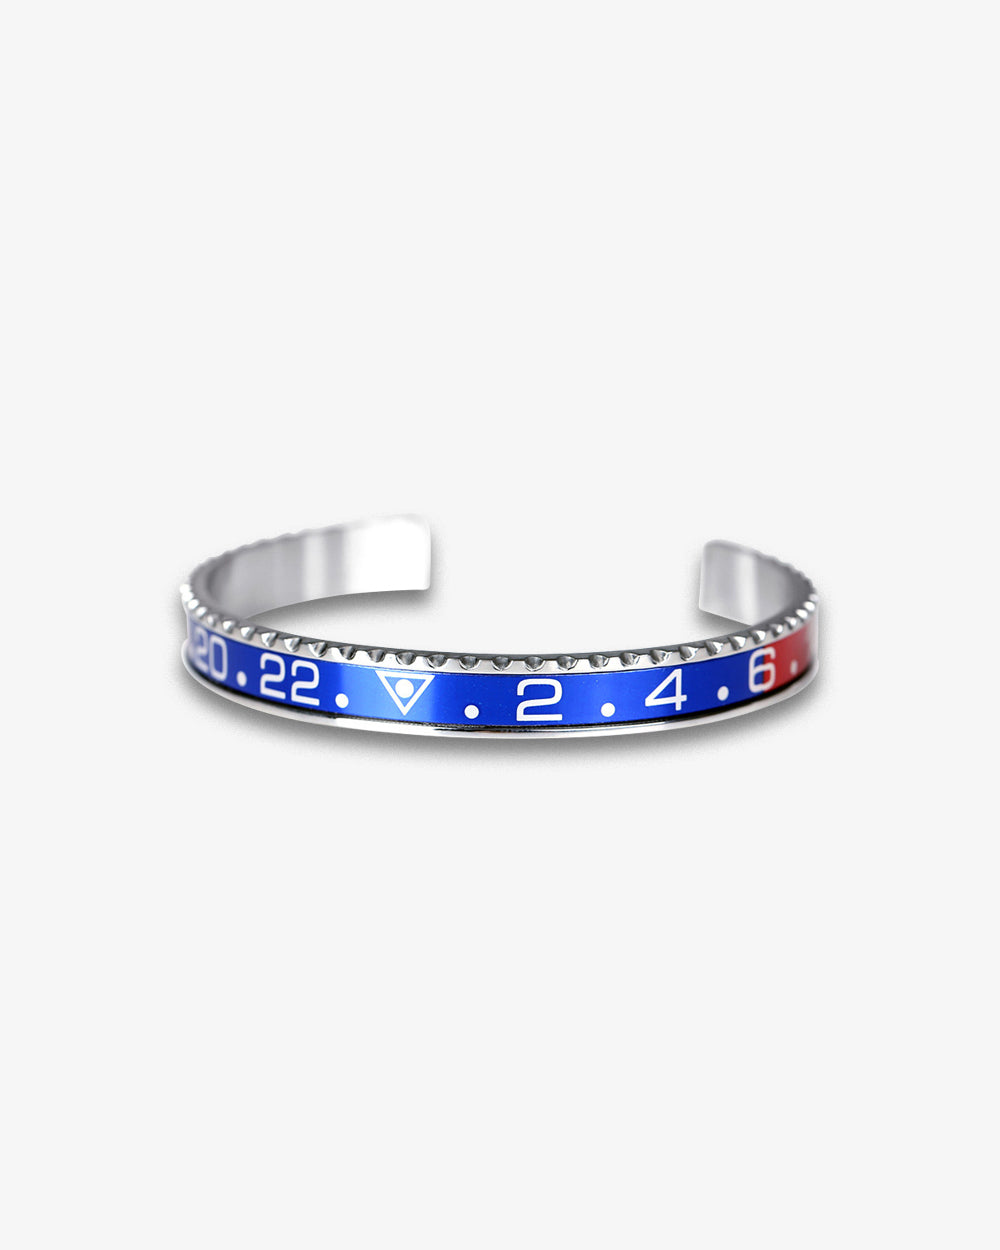 Swiss Concept Classic Dual Time GMT II 'Pepsi' Speed Bracelet (Stainless Steel) - Stainless Steel